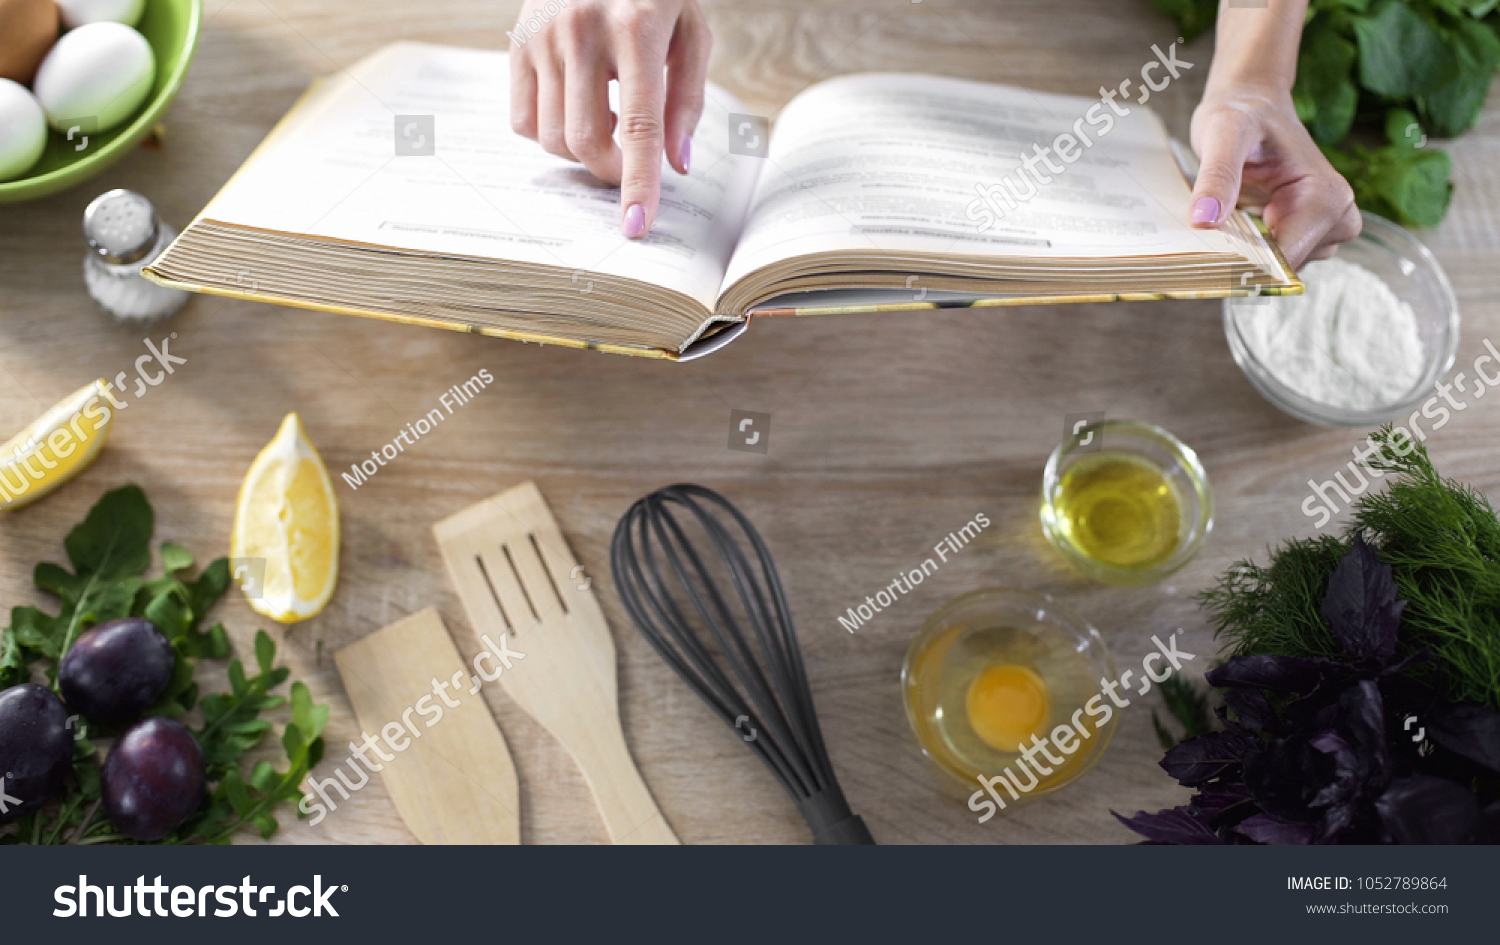 Lady reading pizza recipe in culinary book at home with kitchenware on table #1052789864